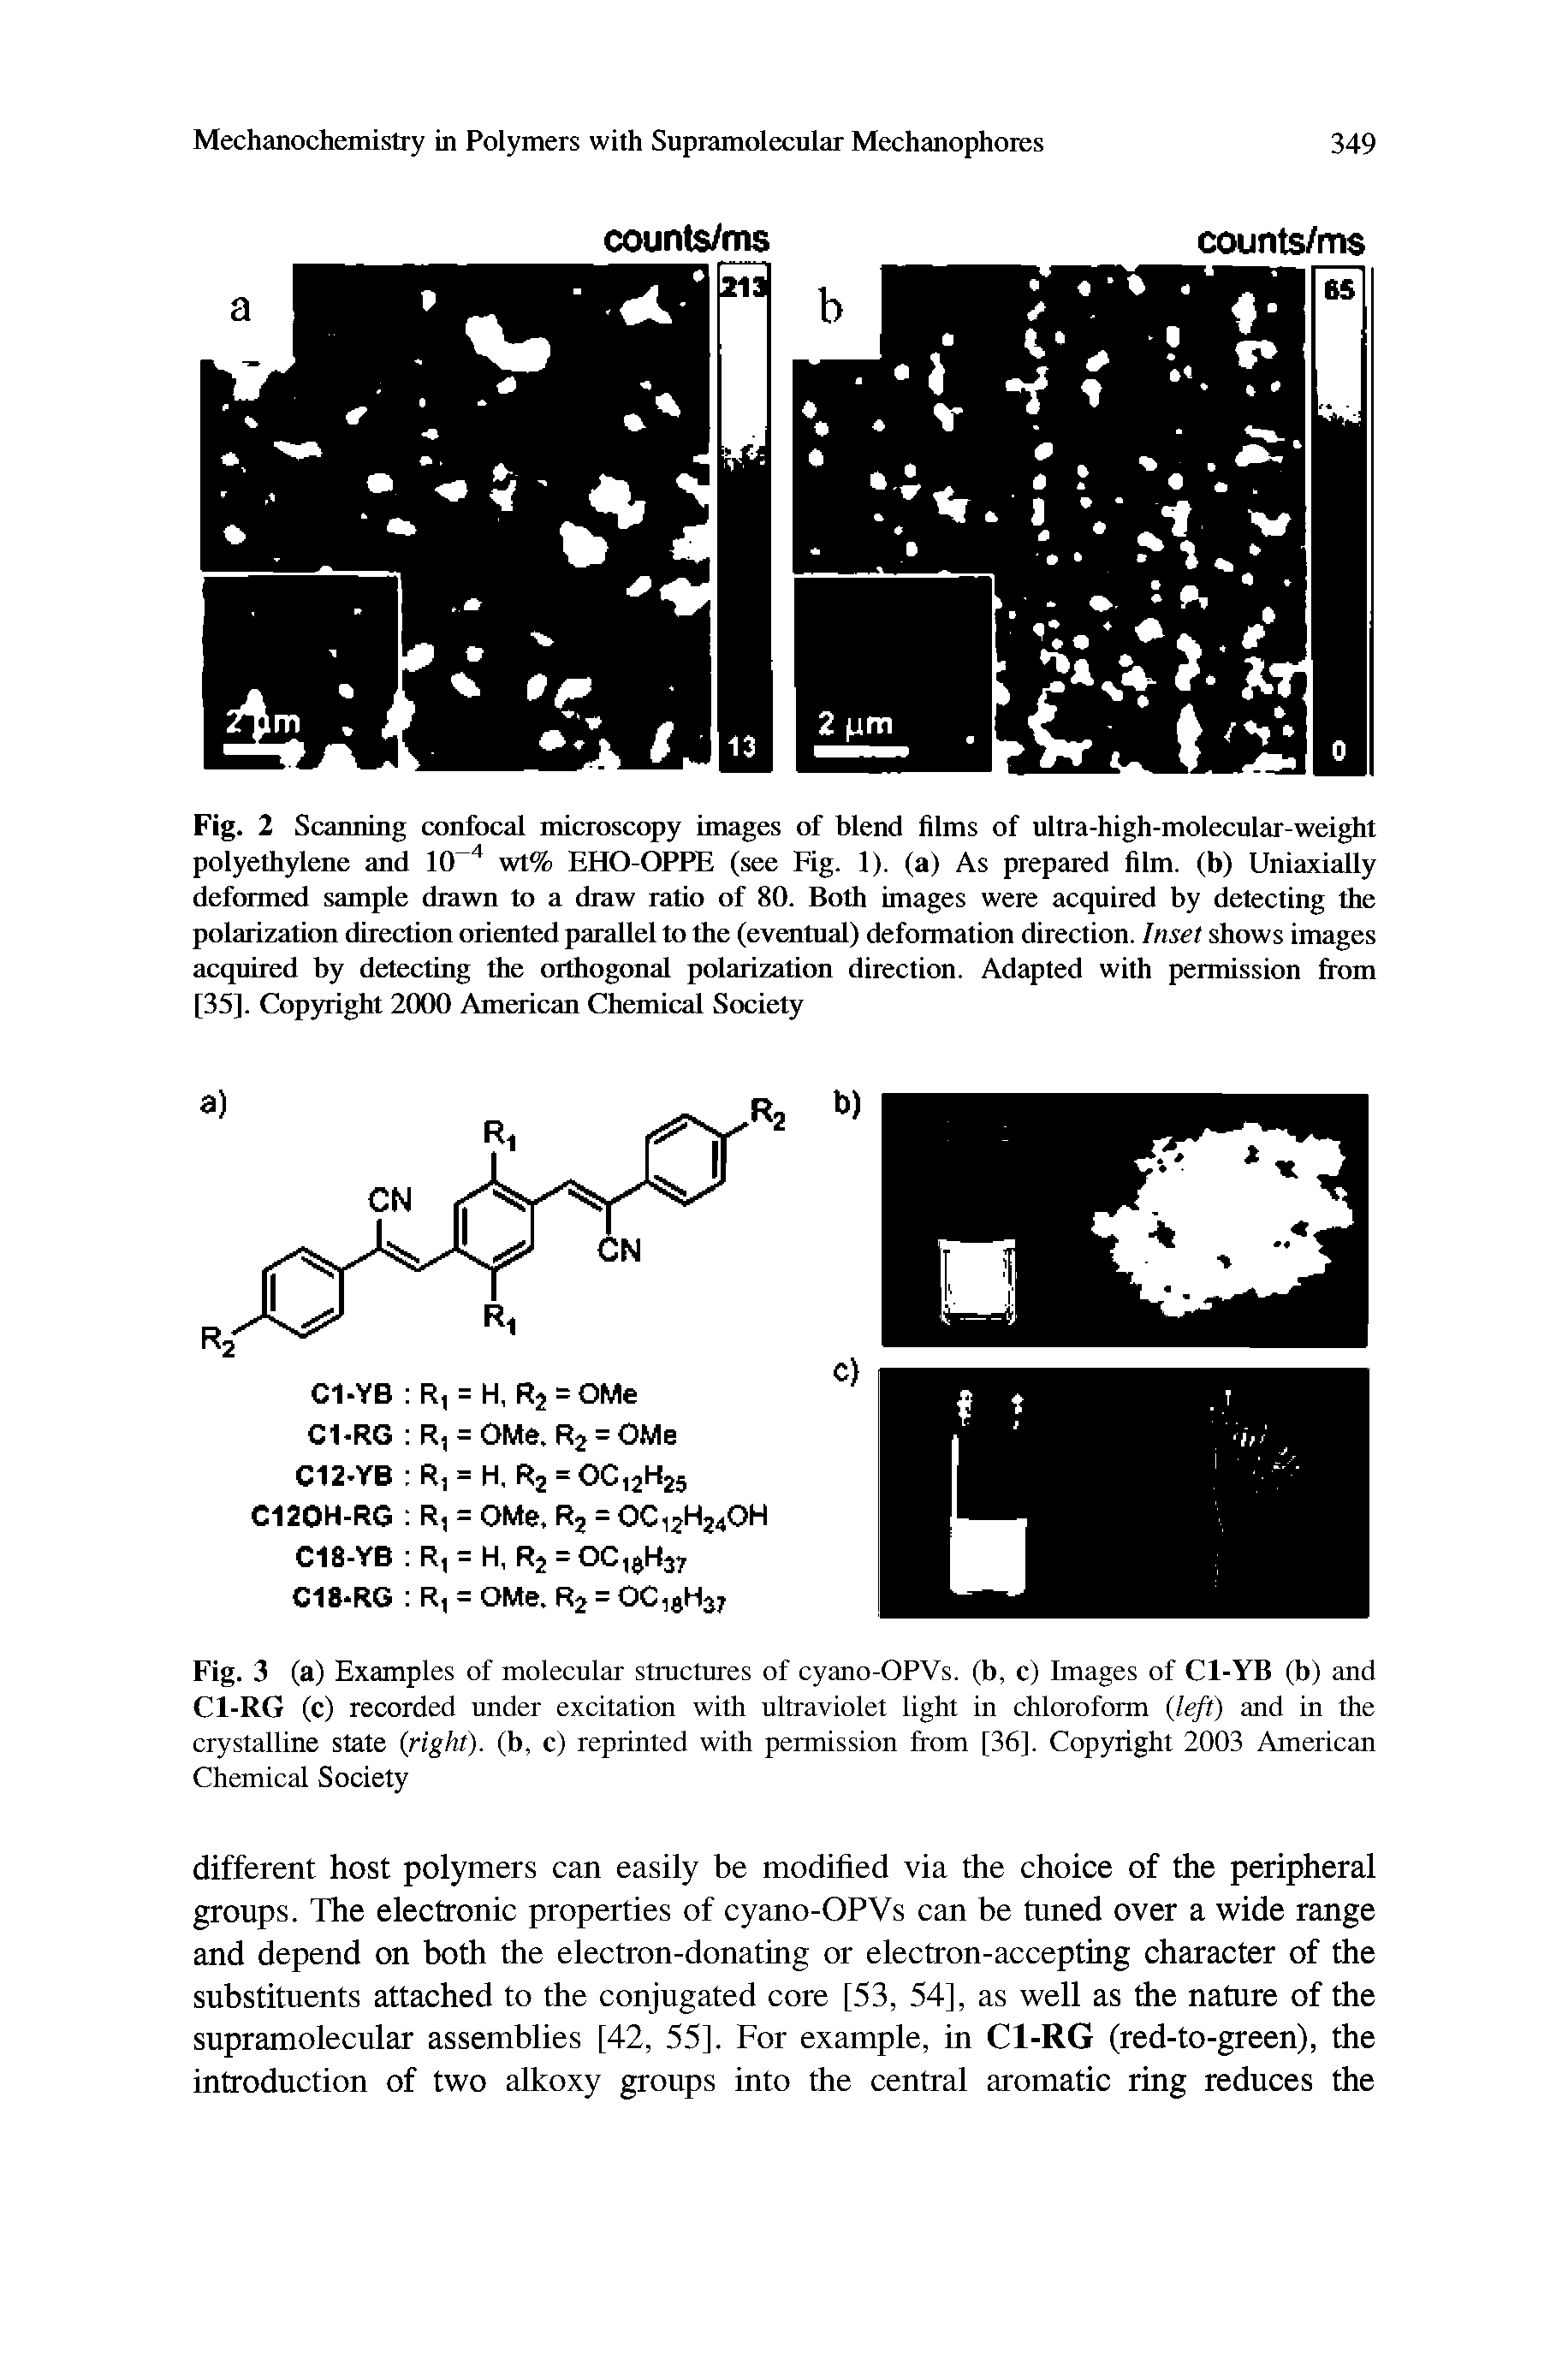 Fig. 2 Scanning confocal microscopy images of blend films of ultra-high-molecular-weight polyethylene and 10 wt% EHO-OPPE (see Fig. 1). (a) As prepared film, (b) Uniaxially deformed sample drawn to a draw ratio of 80. Both images were acquired by detecting the polarization direction oriented parallel to the (eventual) deformation direction. Inset shows images acquired by detecting the orthogonal polarization direction. Adapted with permission from [35]. Copyright 2000 American Chemical Society...